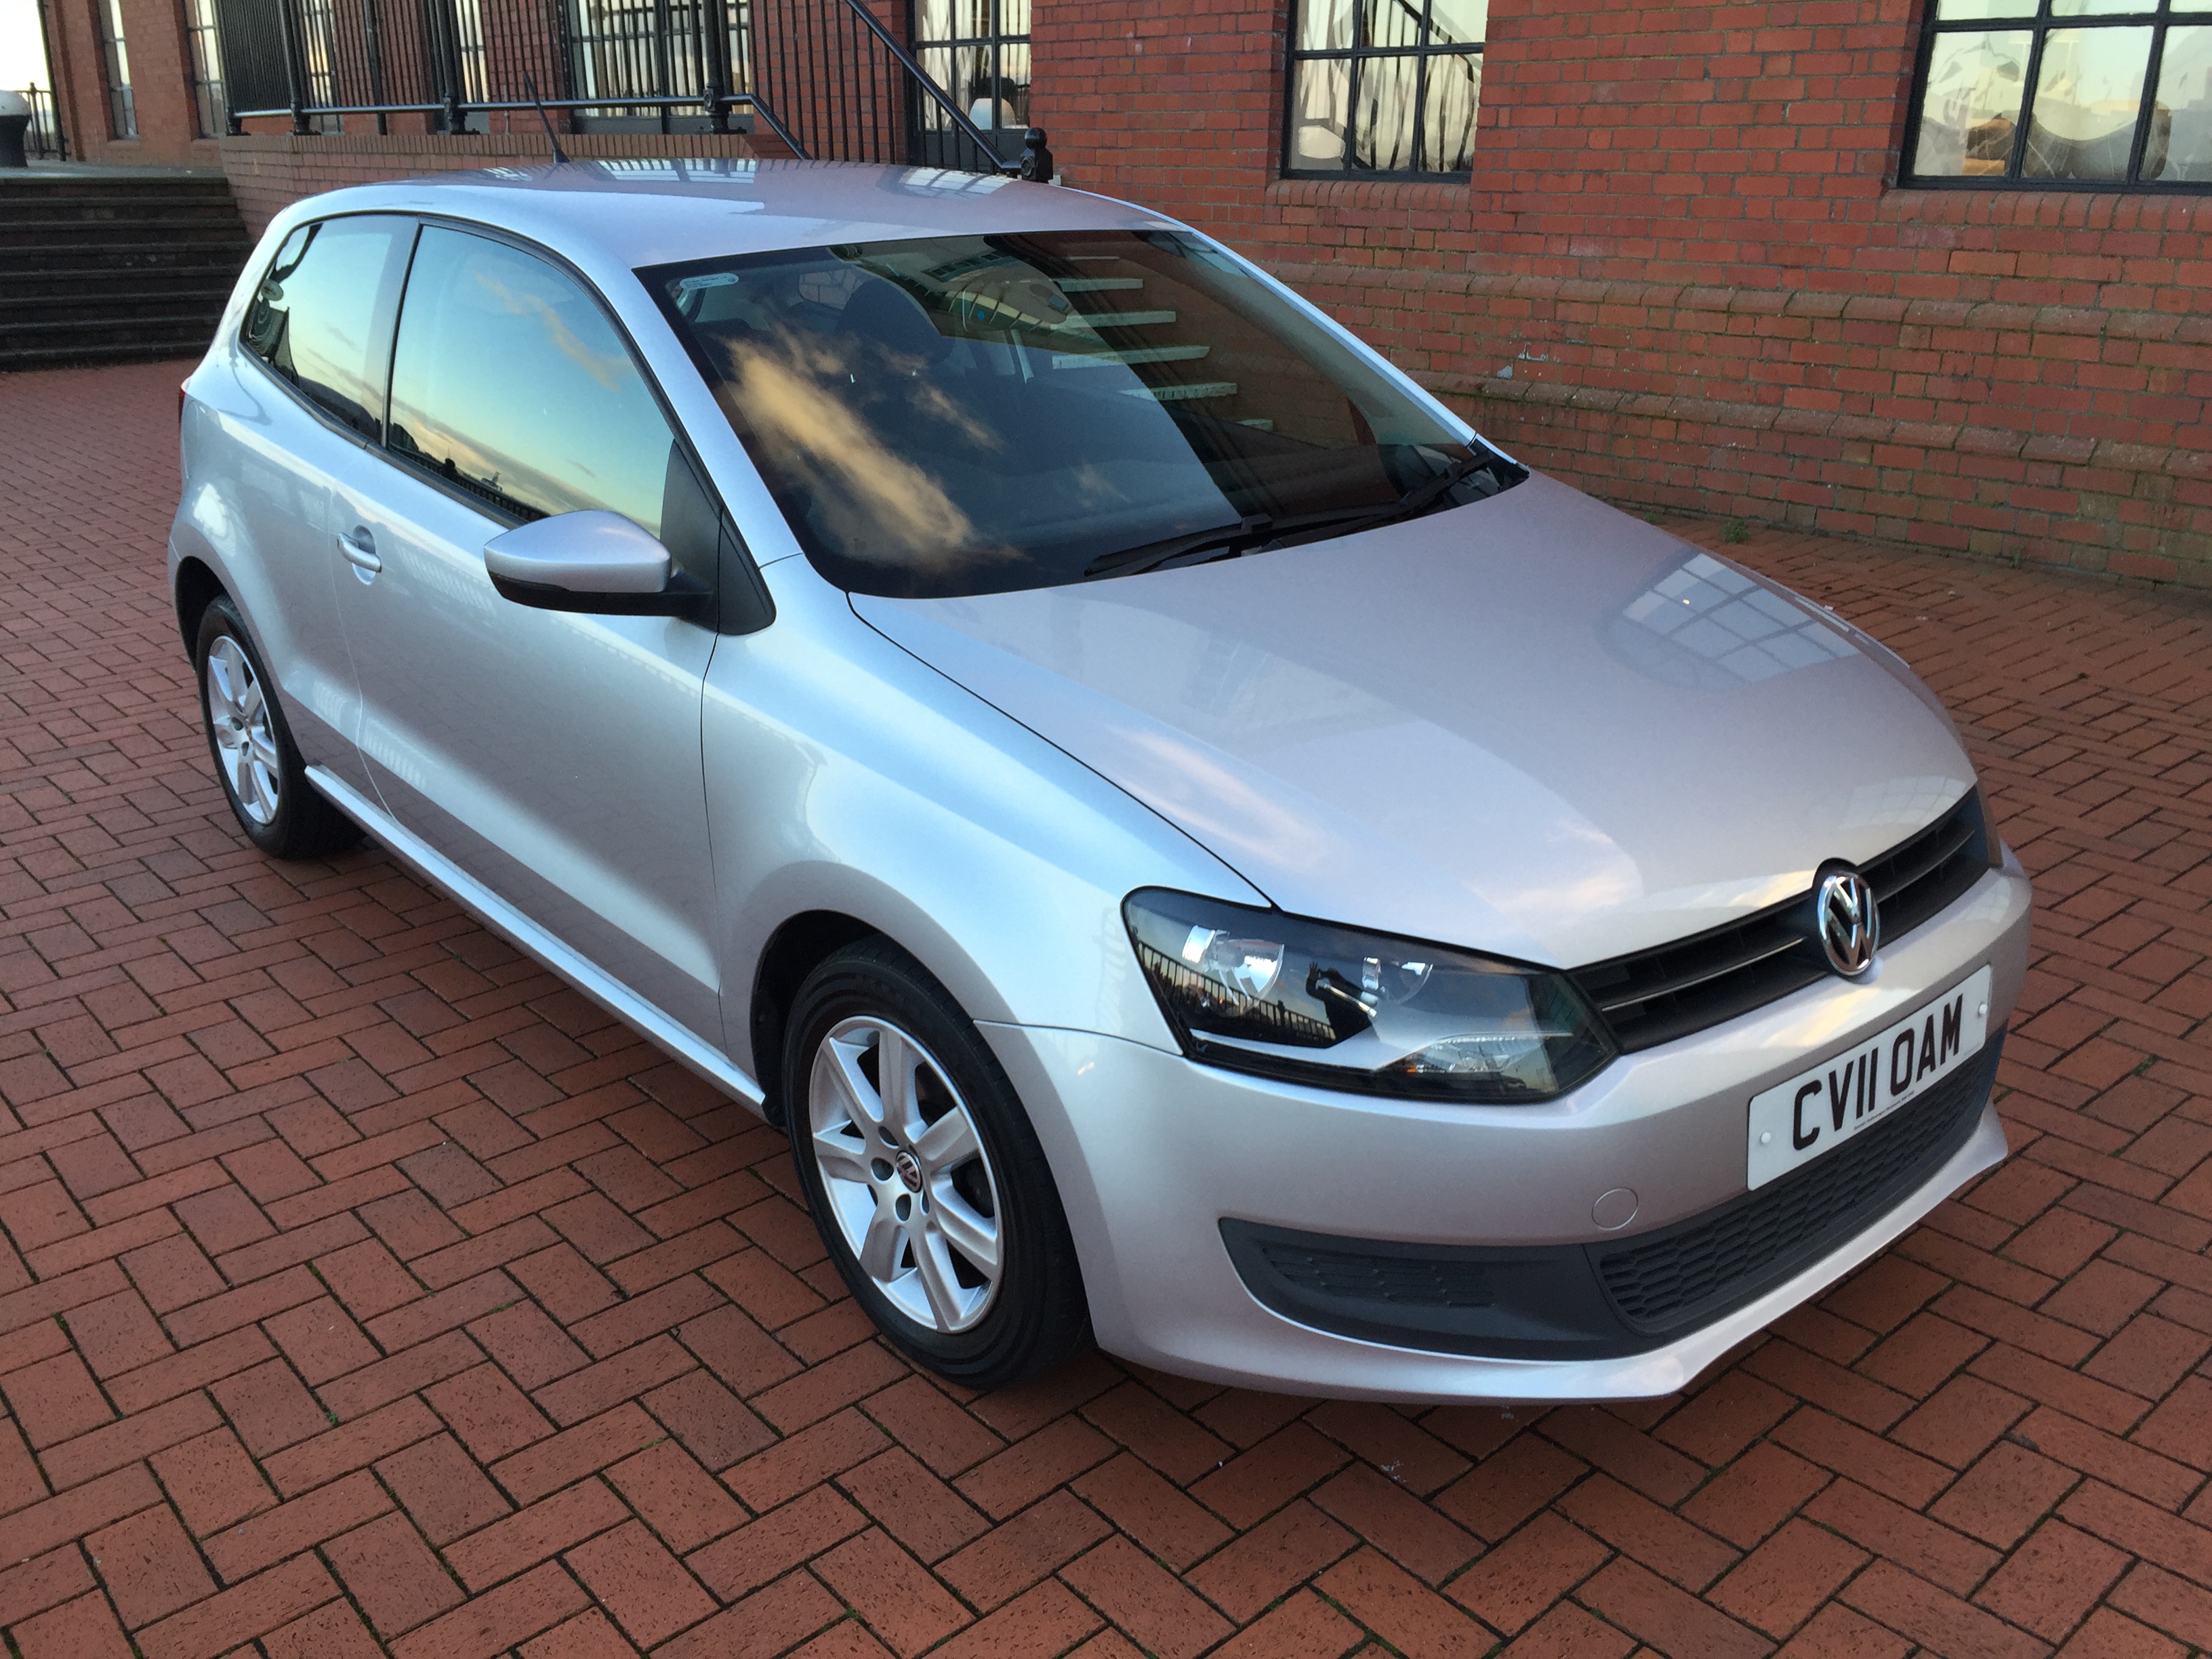 2011 Volkswagen Polo 1.2 SE Cardiff City Used Cars £5500